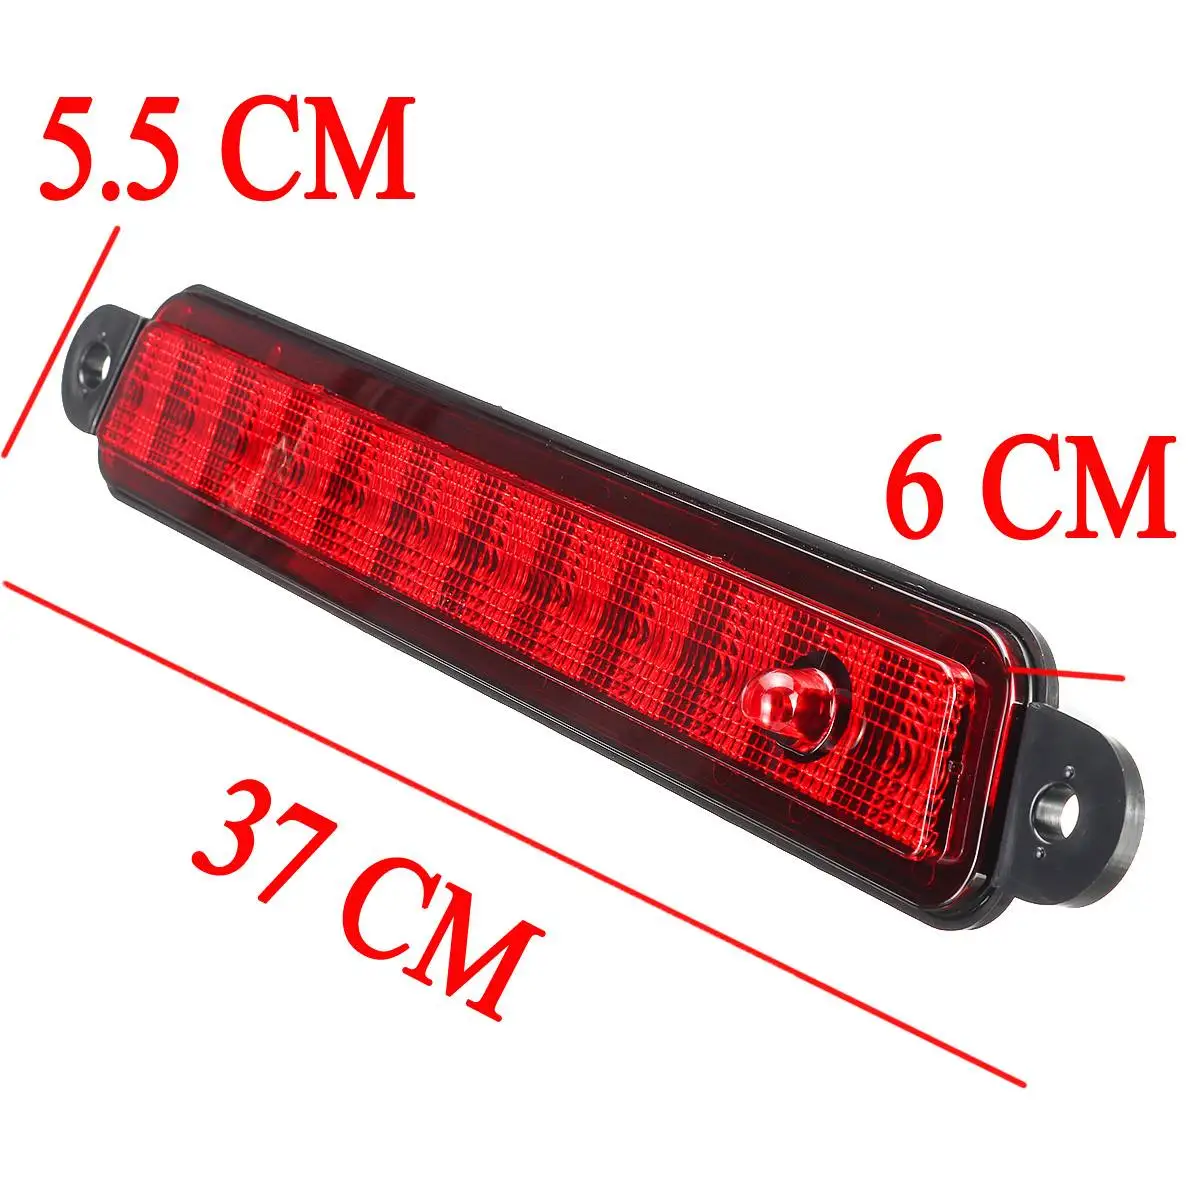 

New Smoke red LED High Mount Stop Rear Tail Light Lamp Red Car Auto Third 3RD Brake Light For Nissan for Armada 05-15 Pathfinder